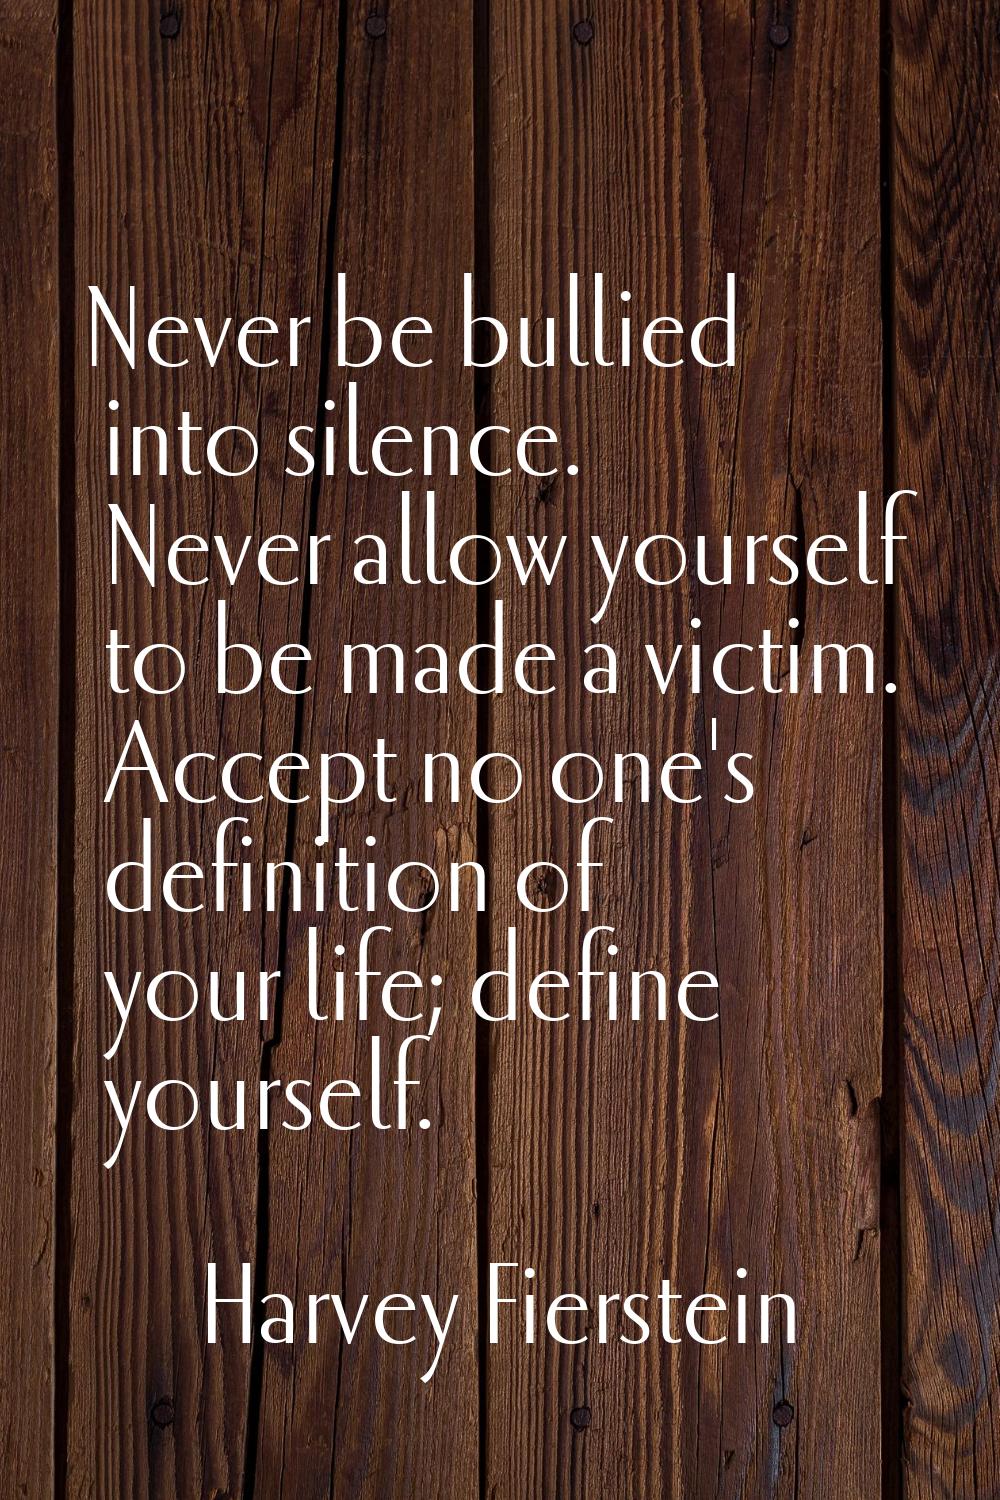 Never be bullied into silence. Never allow yourself to be made a victim. Accept no one's definition